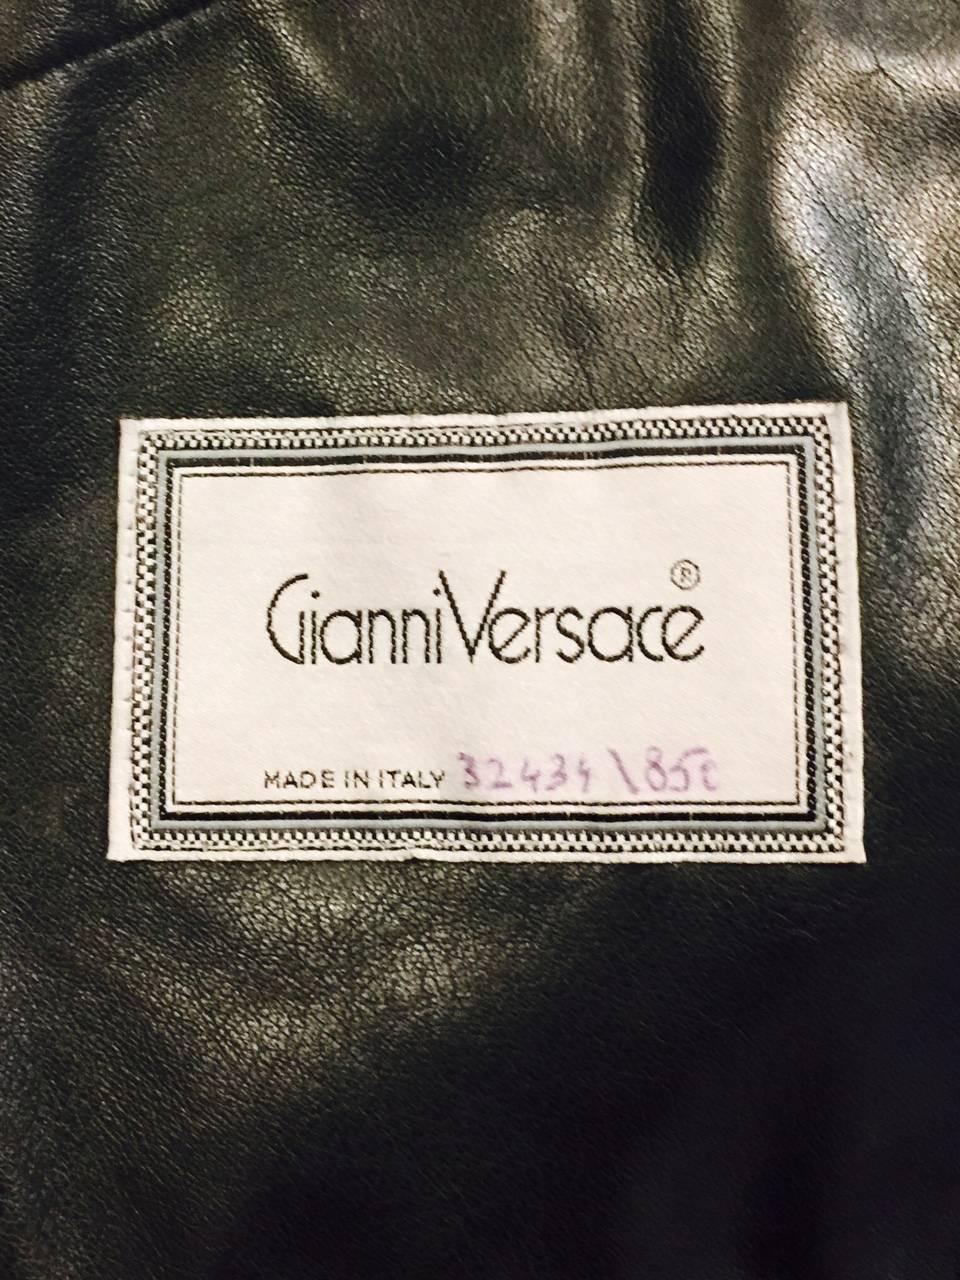 Men's Gianni Versace Deep Forest Green Shearling Coat With Shawl Collar  For Sale